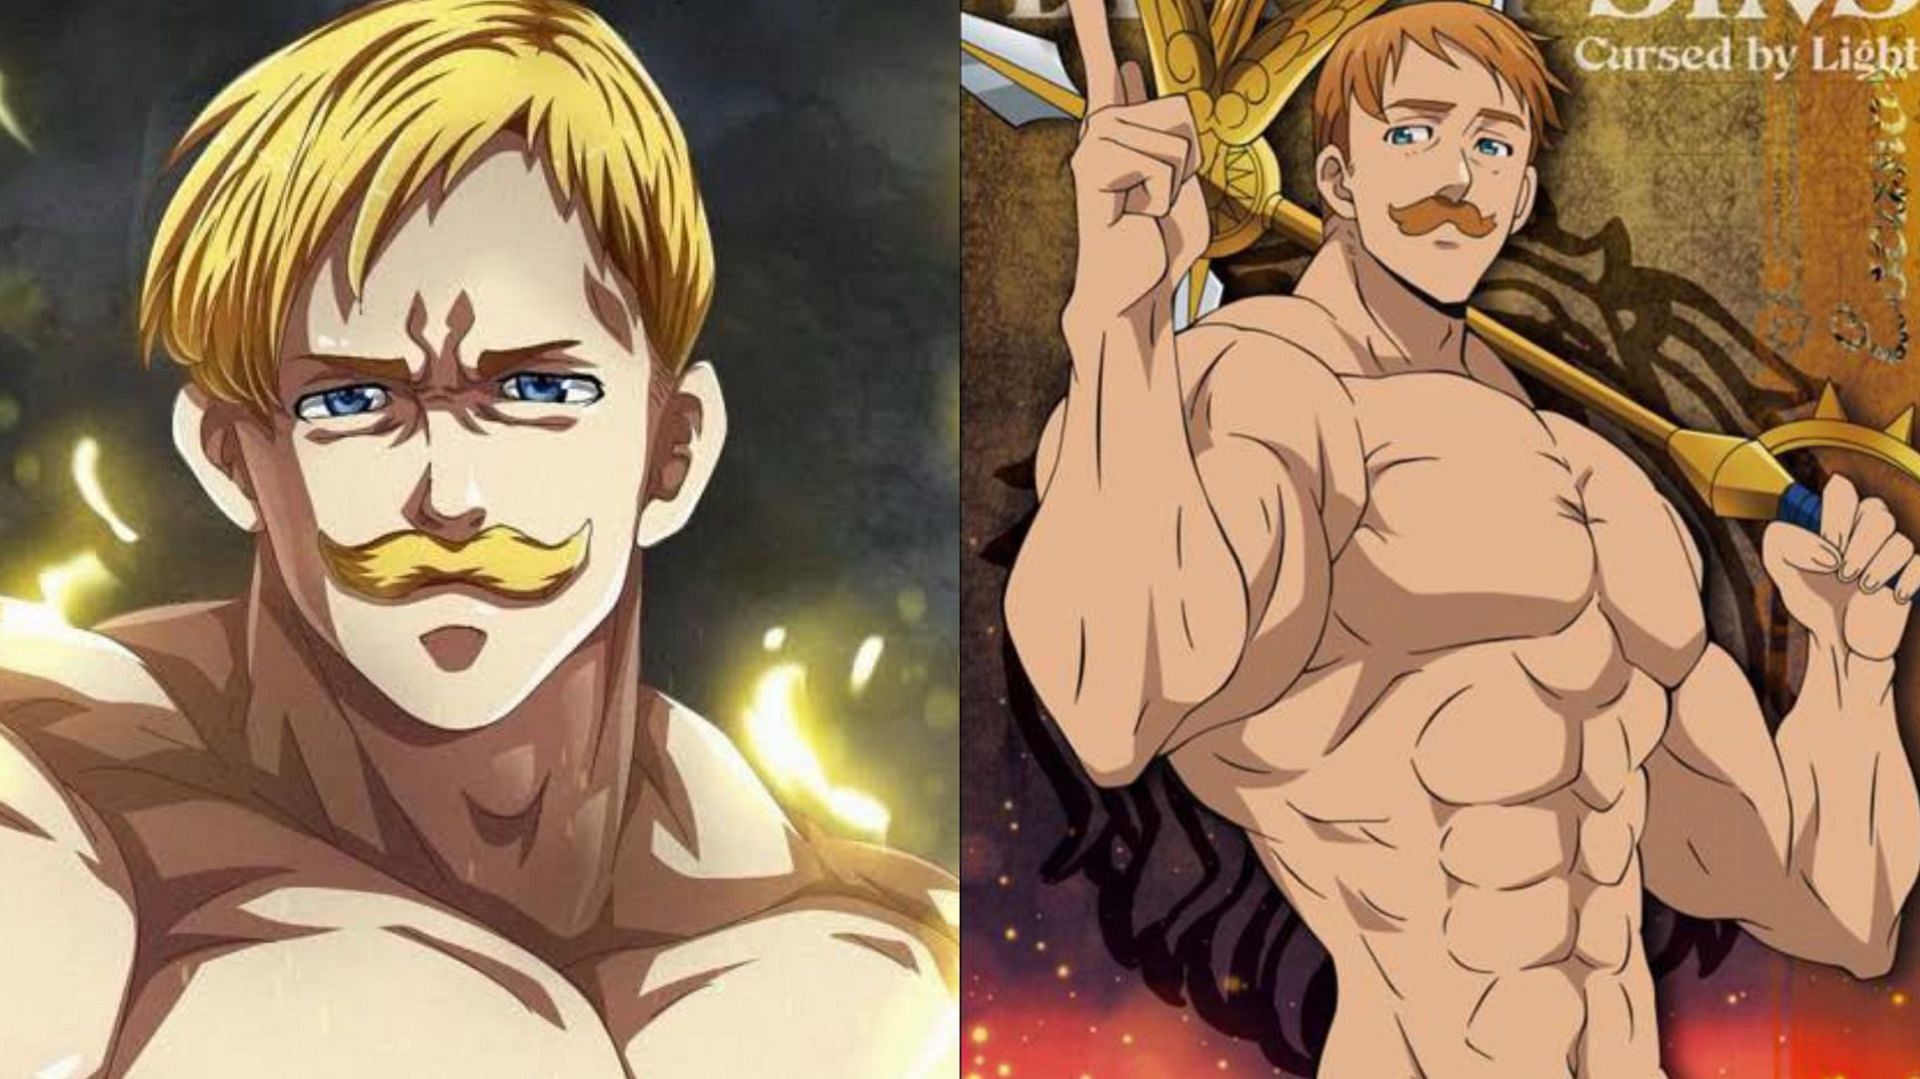 Muscular Anime Characters (Image via Pinterest)